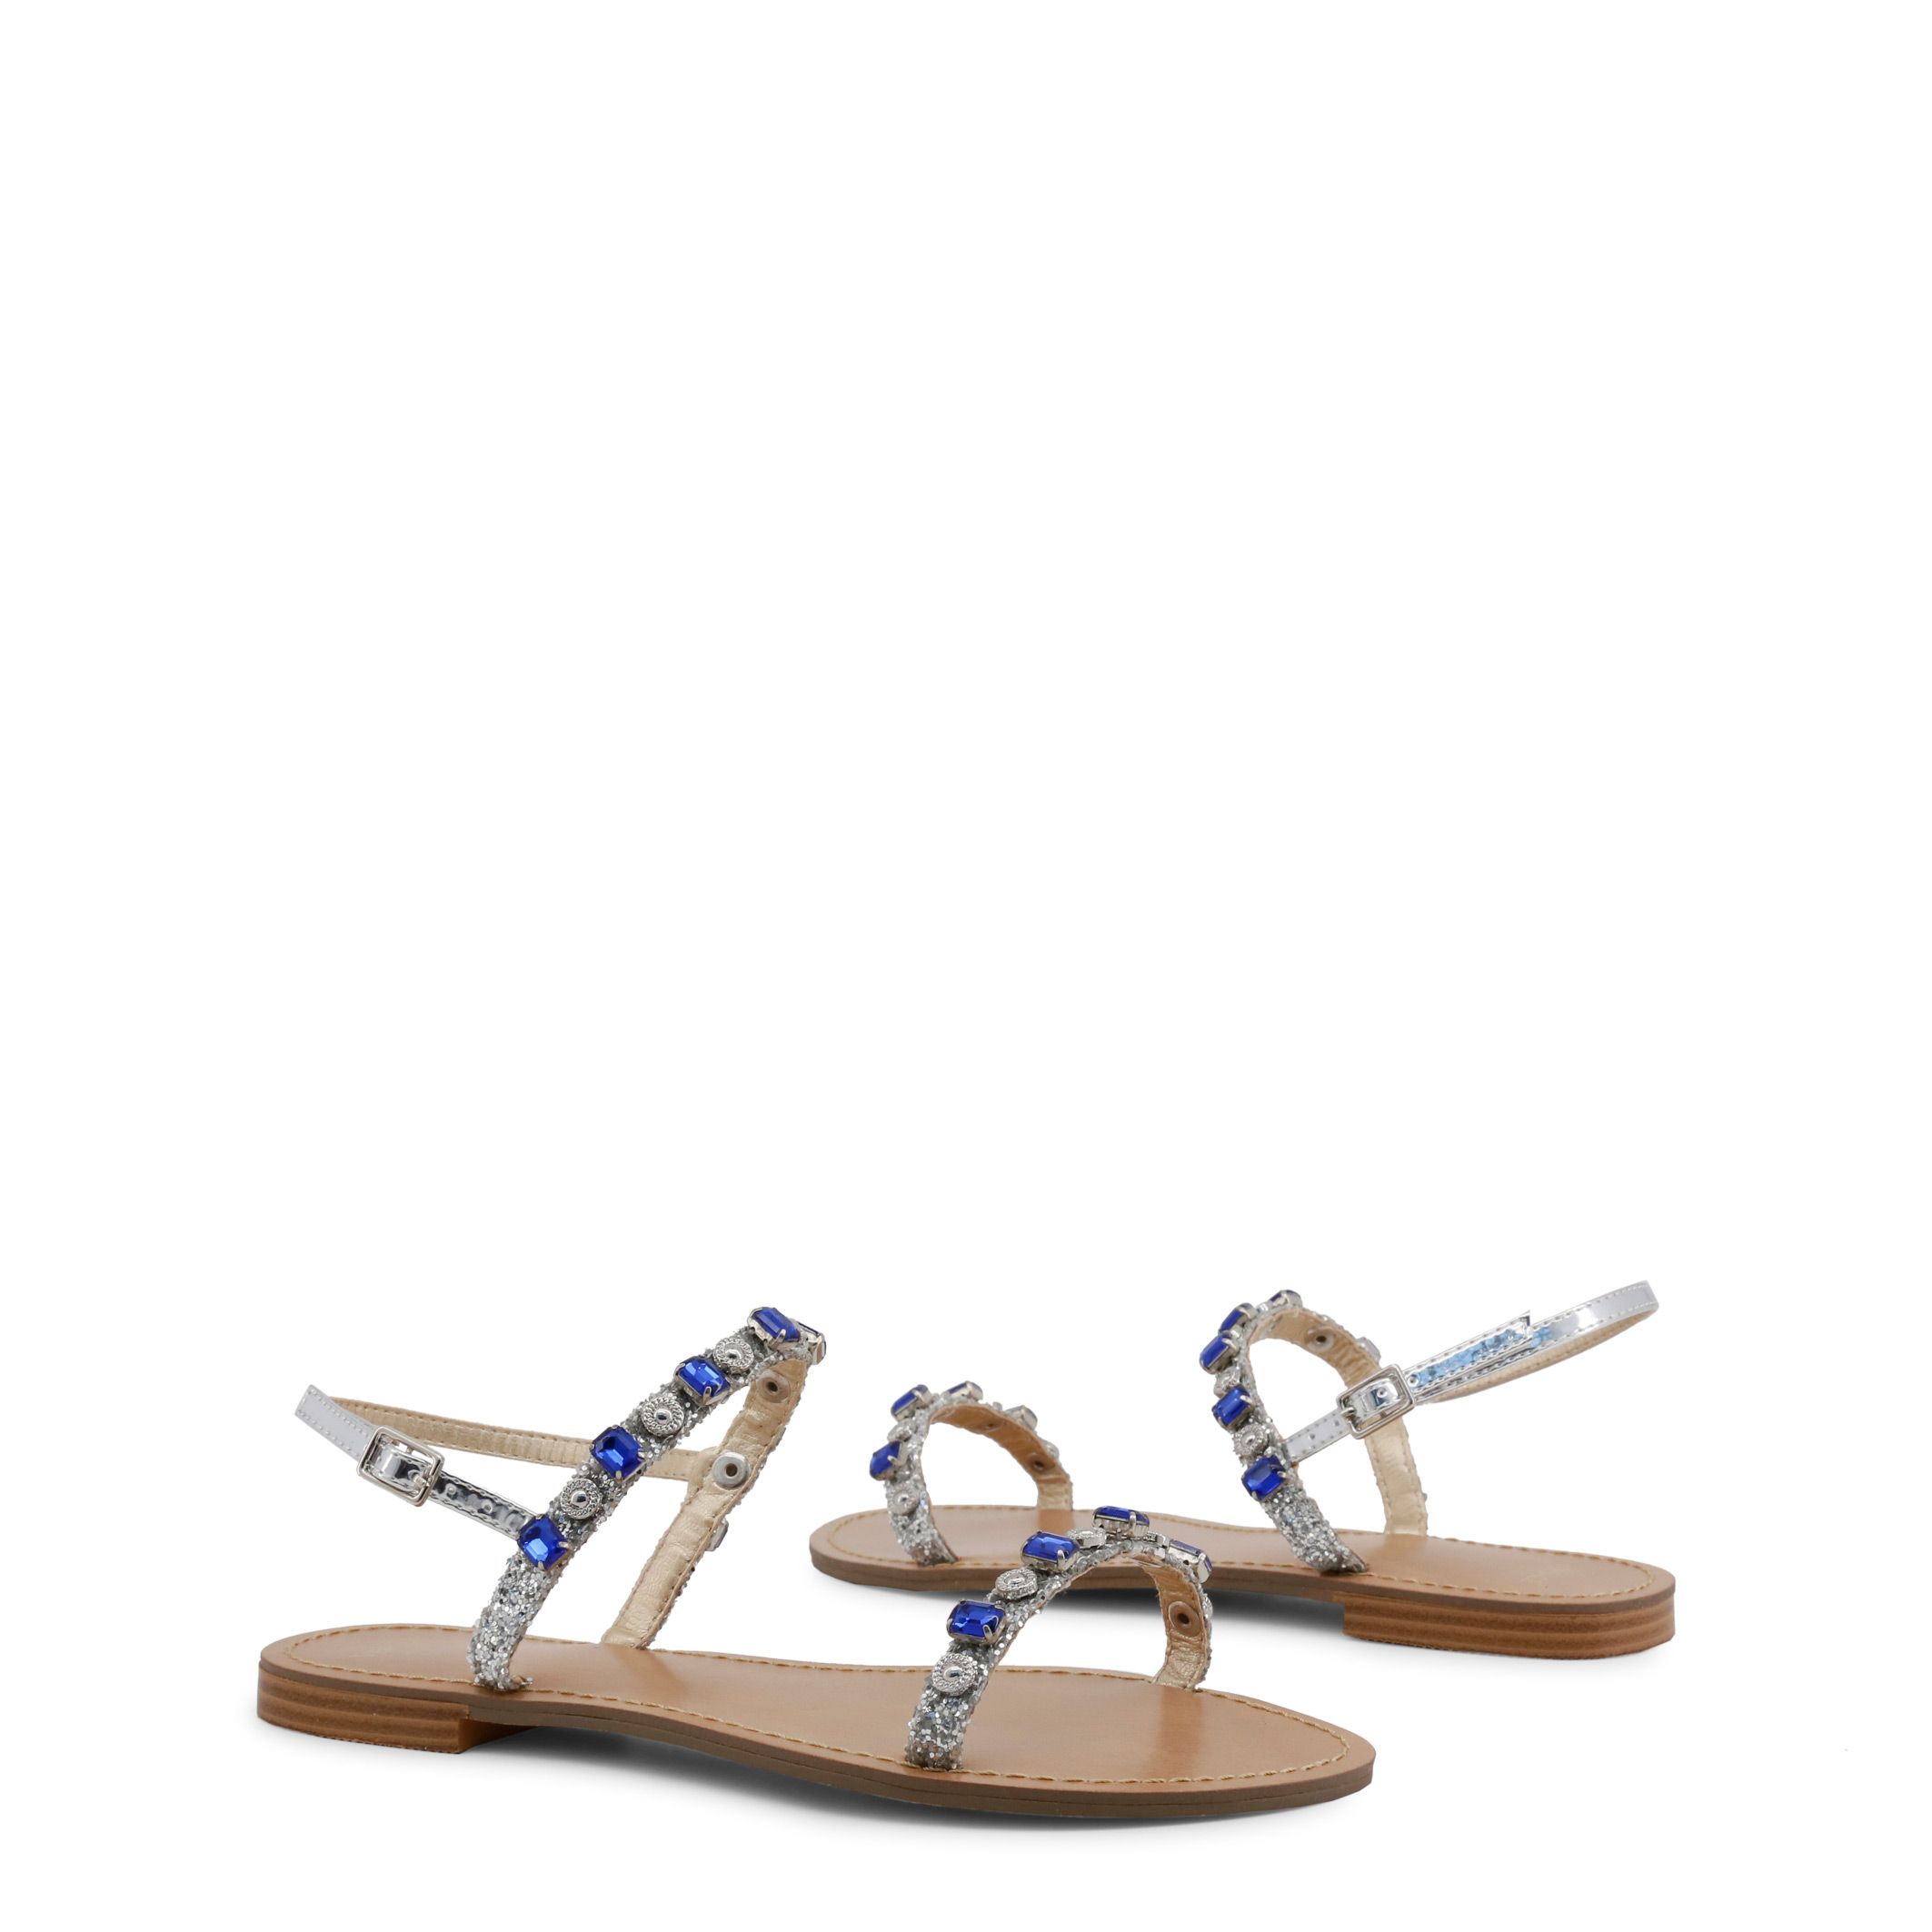 Collection: Spring/Summer <br> Gender: Woman <br> Type: Sandals <br> Upper: synthetic material <br> Internal lining: synthetic material, leather <br> Sole: synthetic material <br> Heel height cm: 1 <br> Details: studs, ankle strap